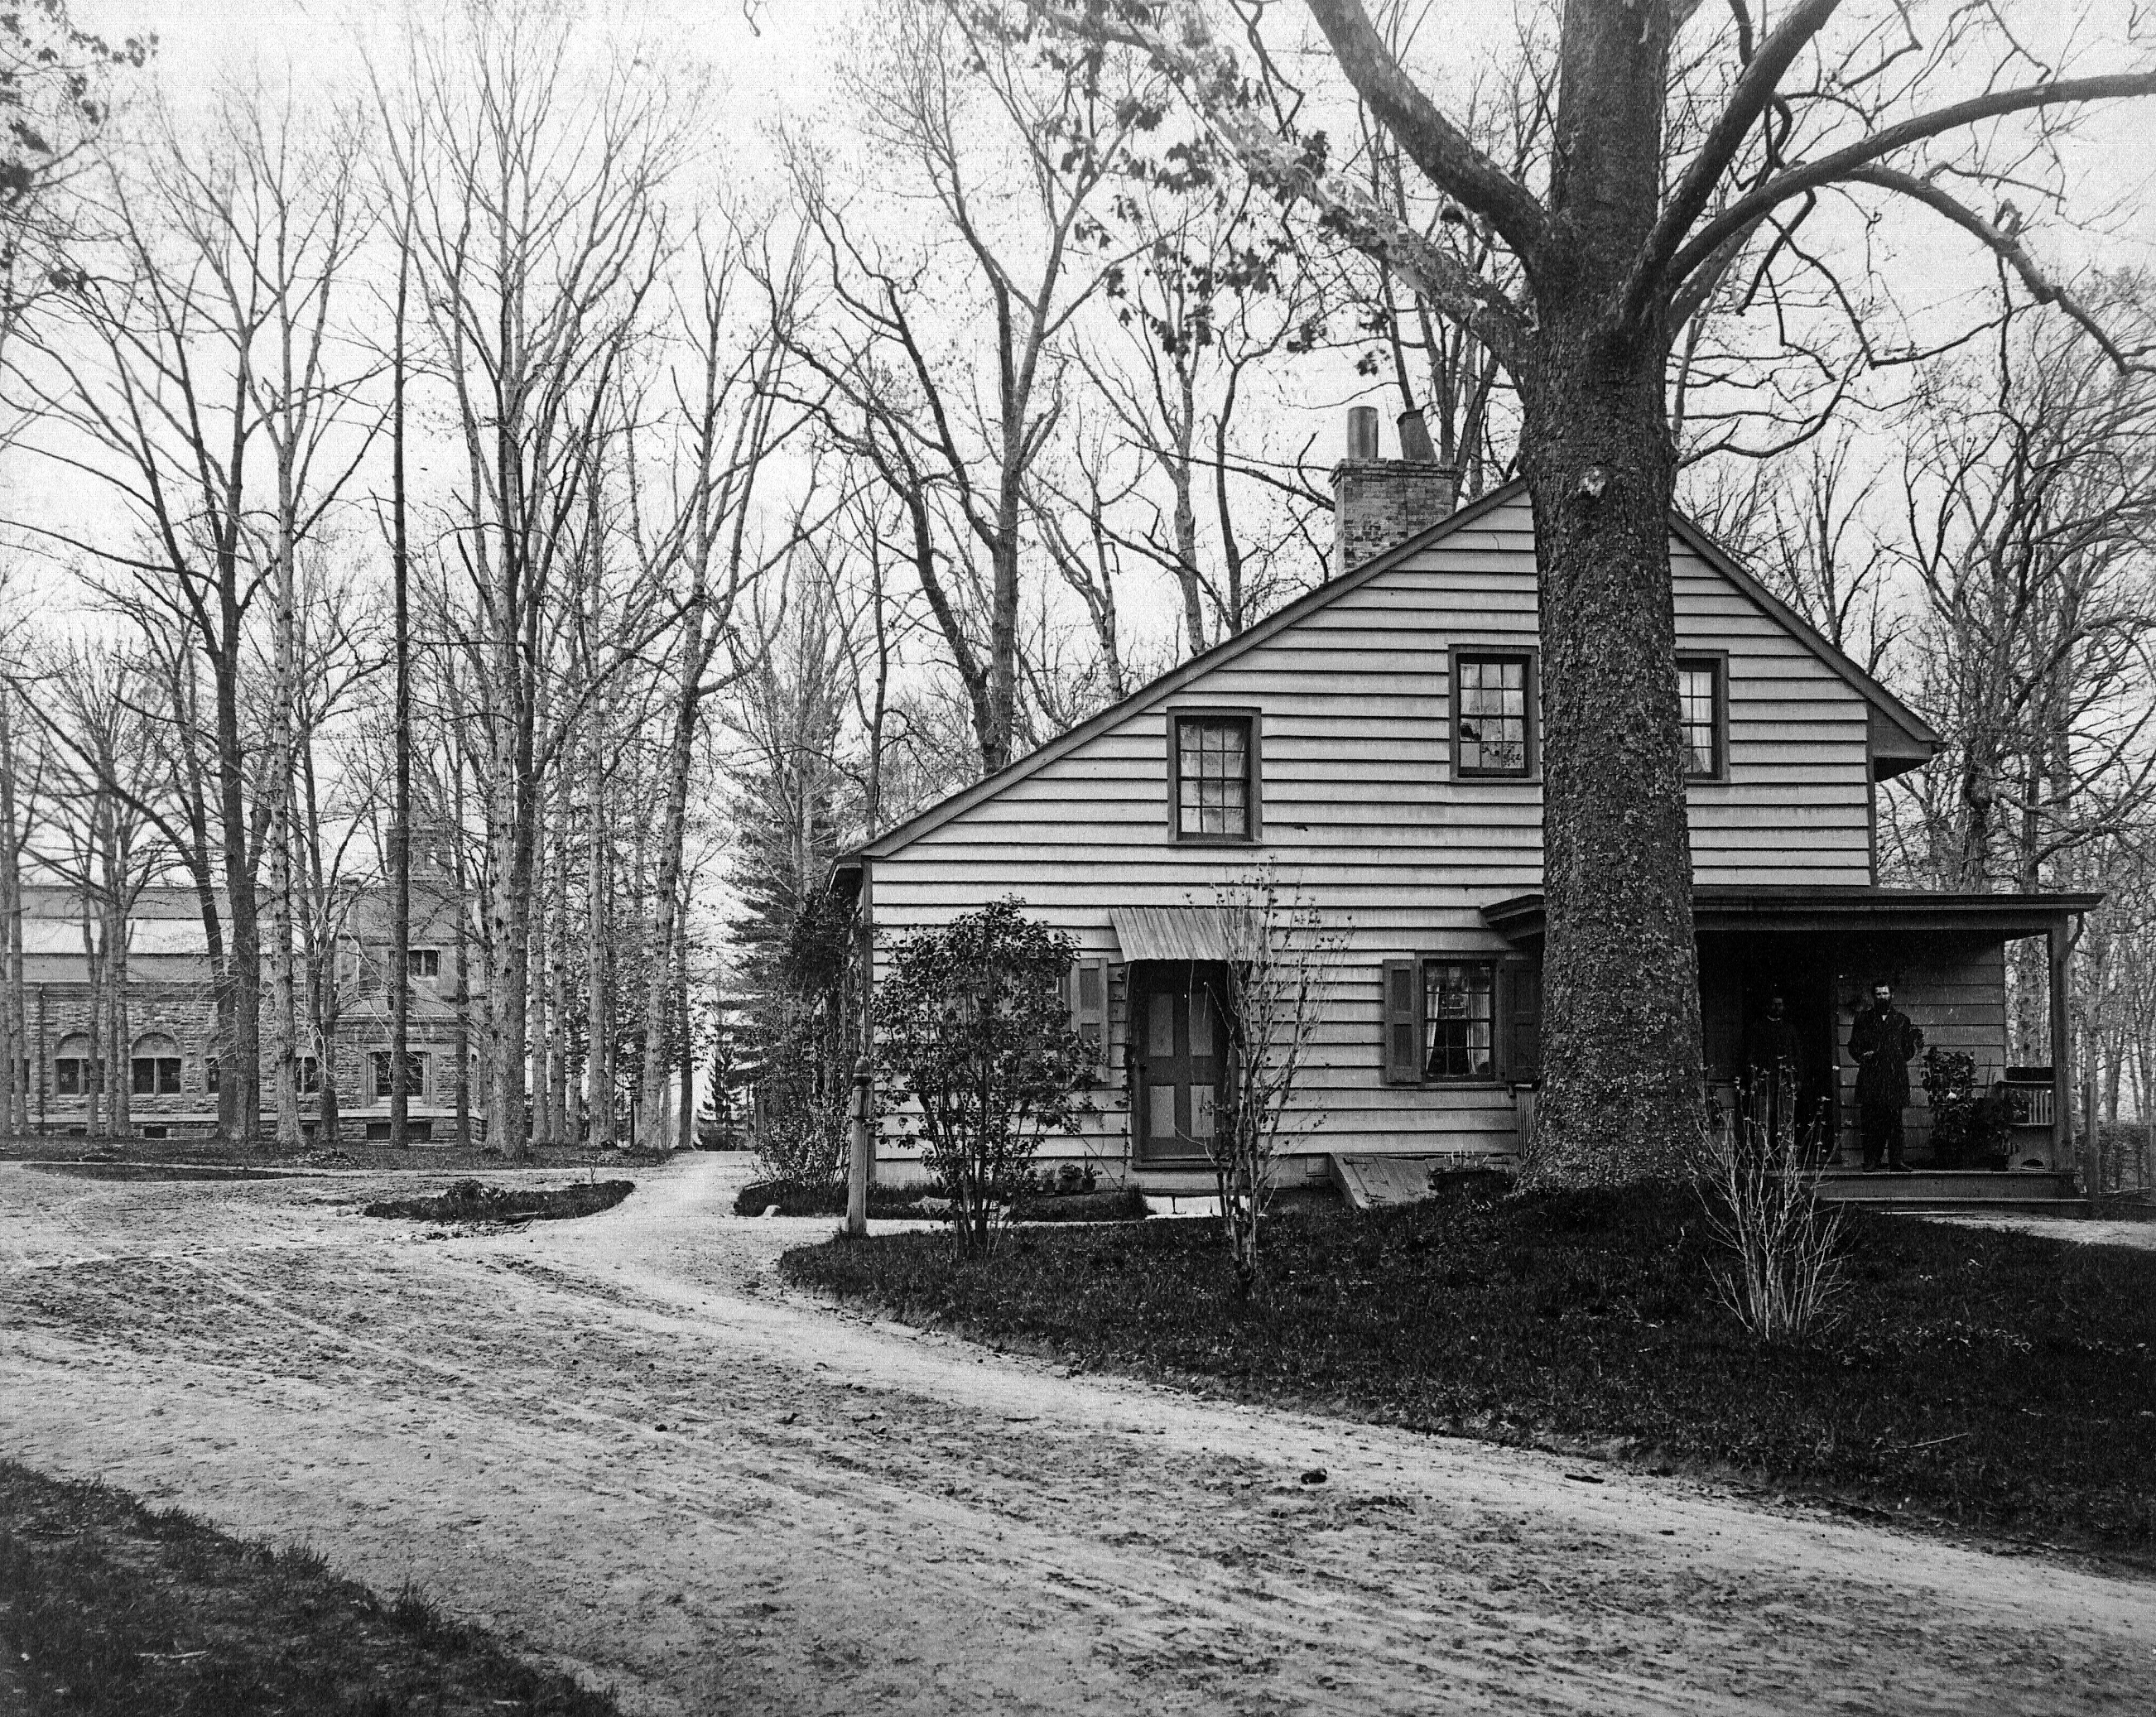 Sycamore Cottage prior to 1938.  Notice two people on porch on right